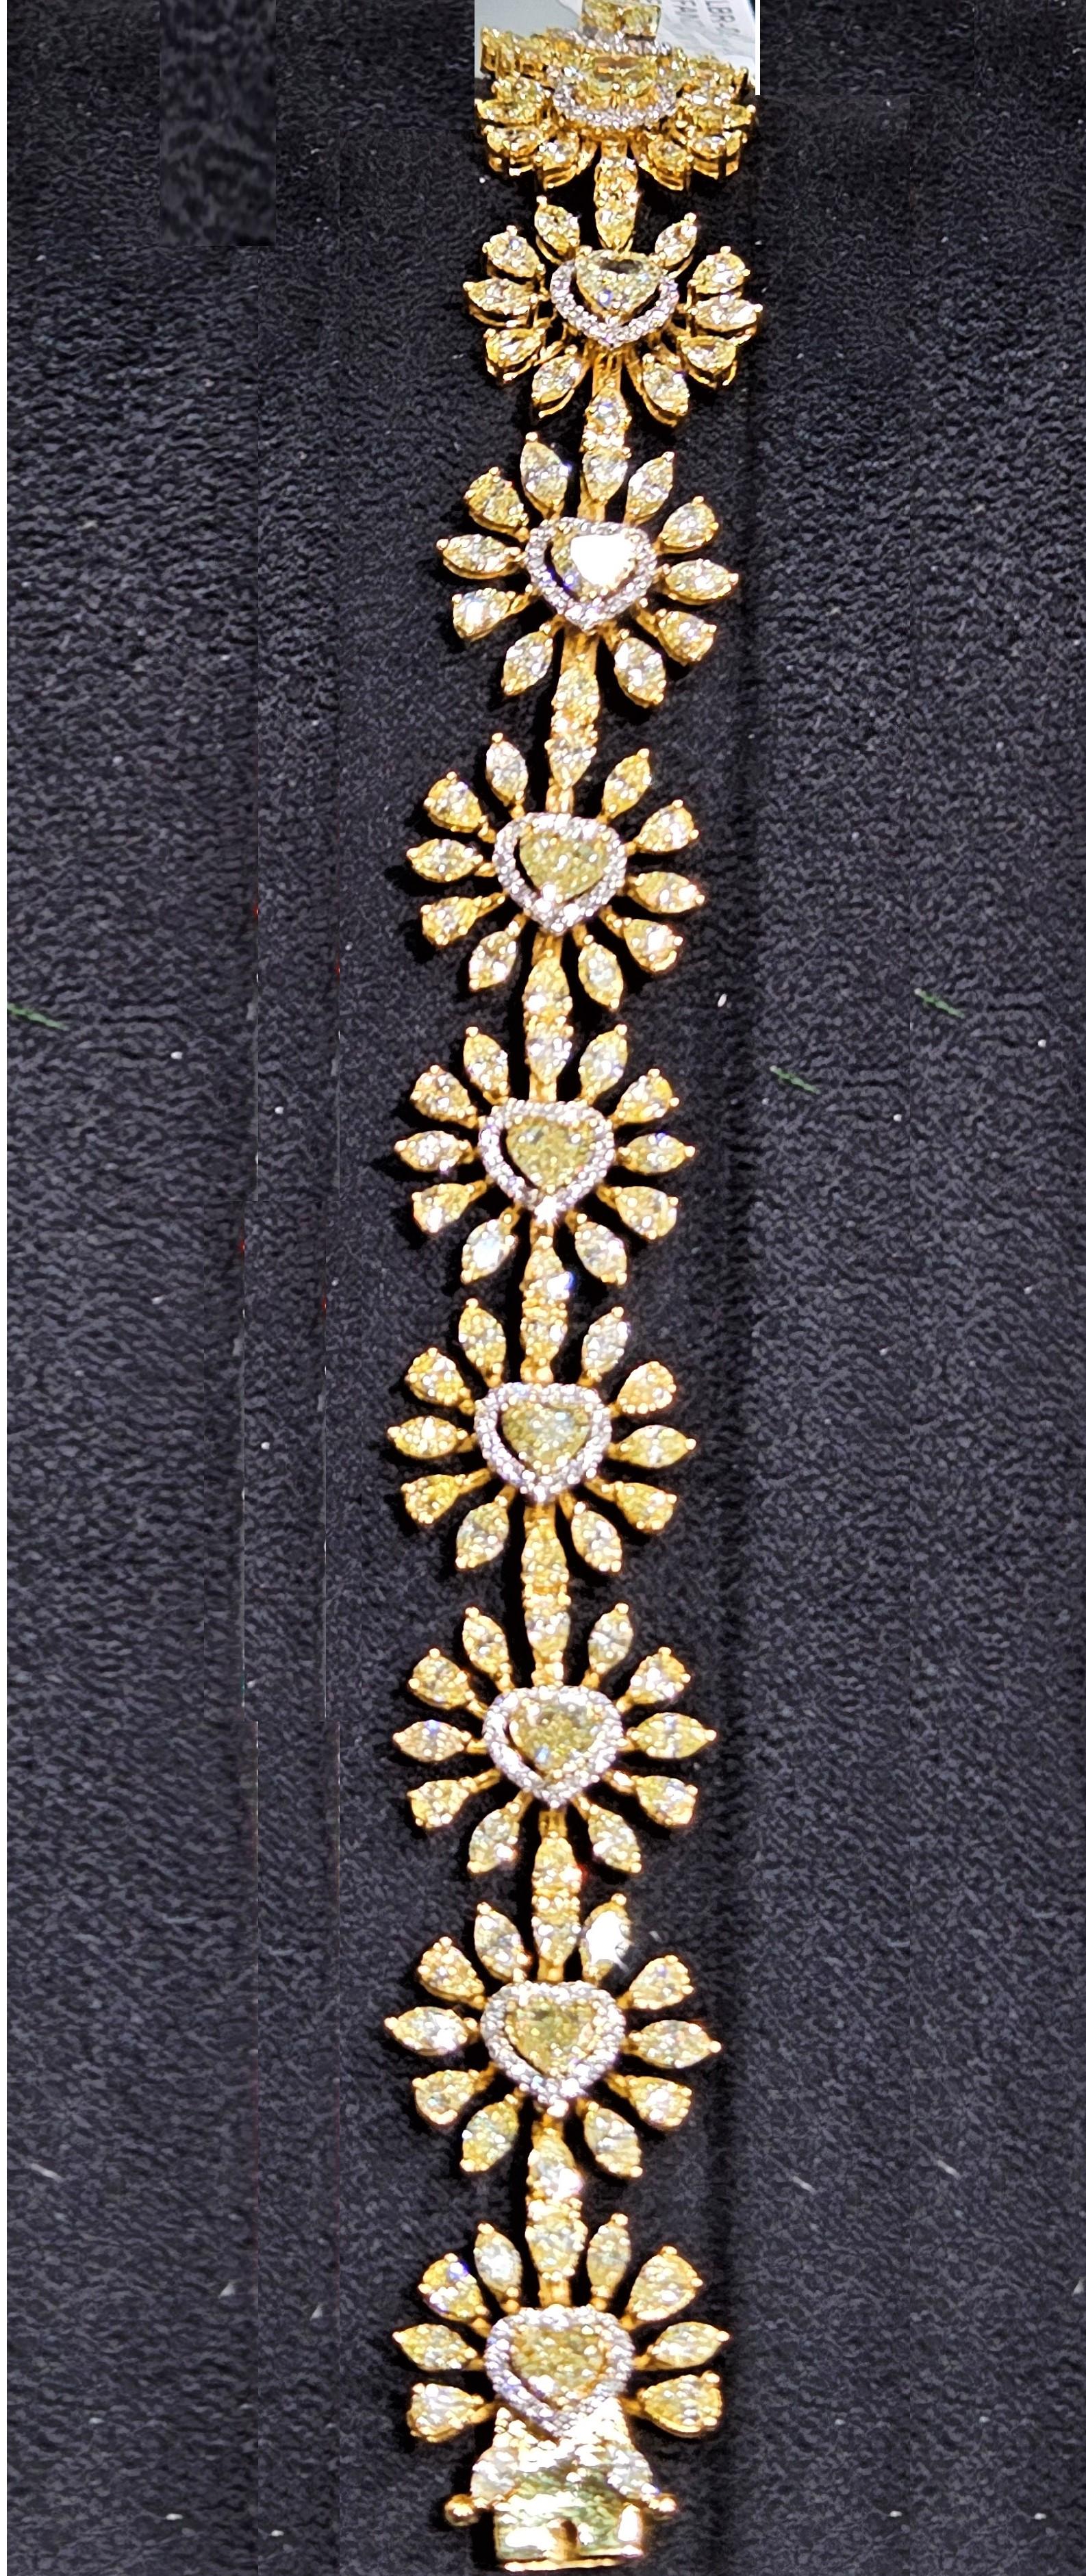 The Following Item we are offering is this Beautiful Rare Important Gold Large Glittering Heart Diamond Tennis Bracelet. Bracelet is comprised of approx 15CTS Magnificent Rare Gorgeous Fancy Glittering Heart Shaped Yellow Diamonds each surrounded